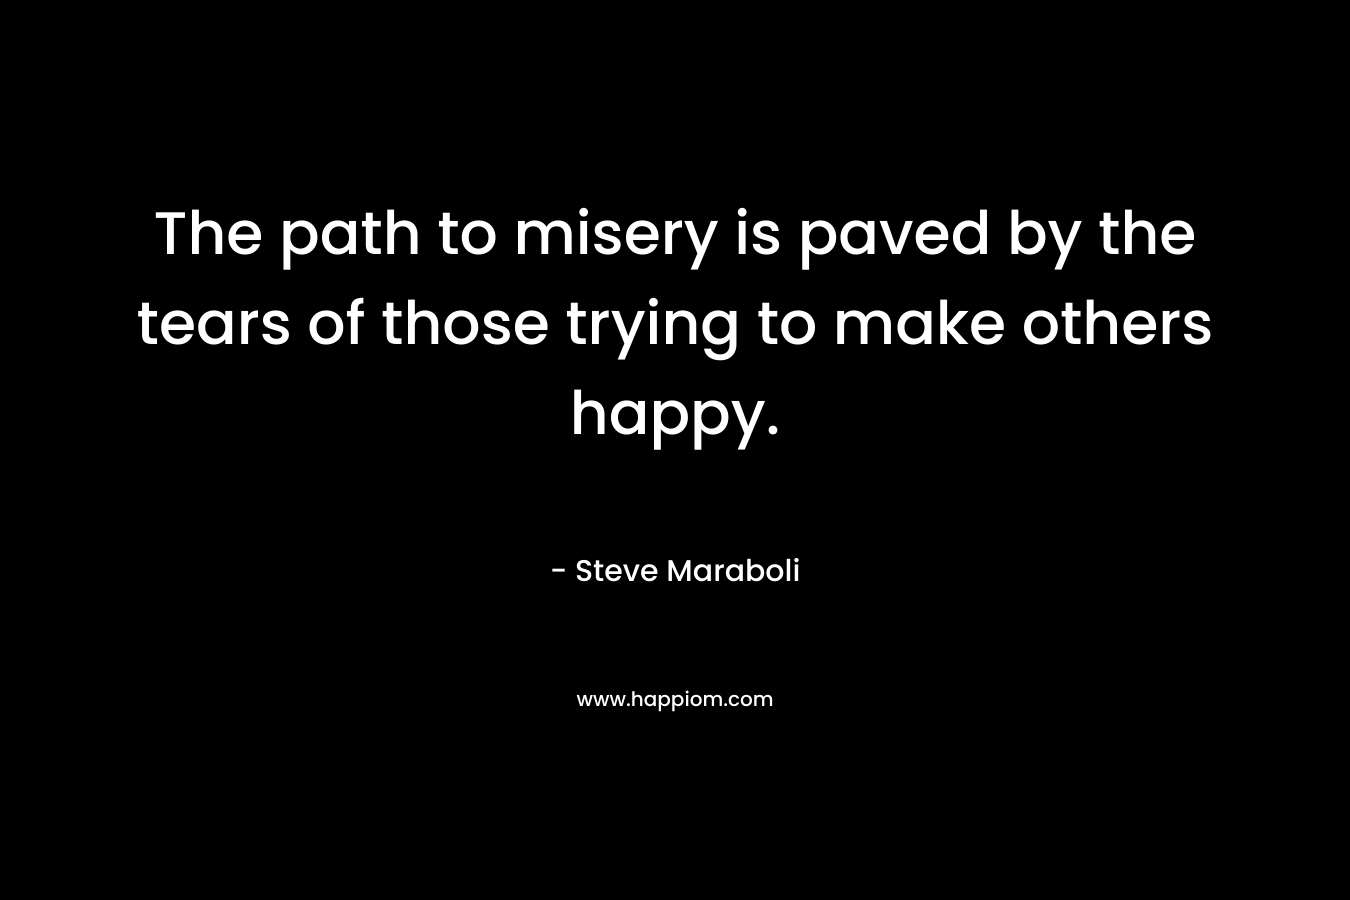 The path to misery is paved by the tears of those trying to make others happy.